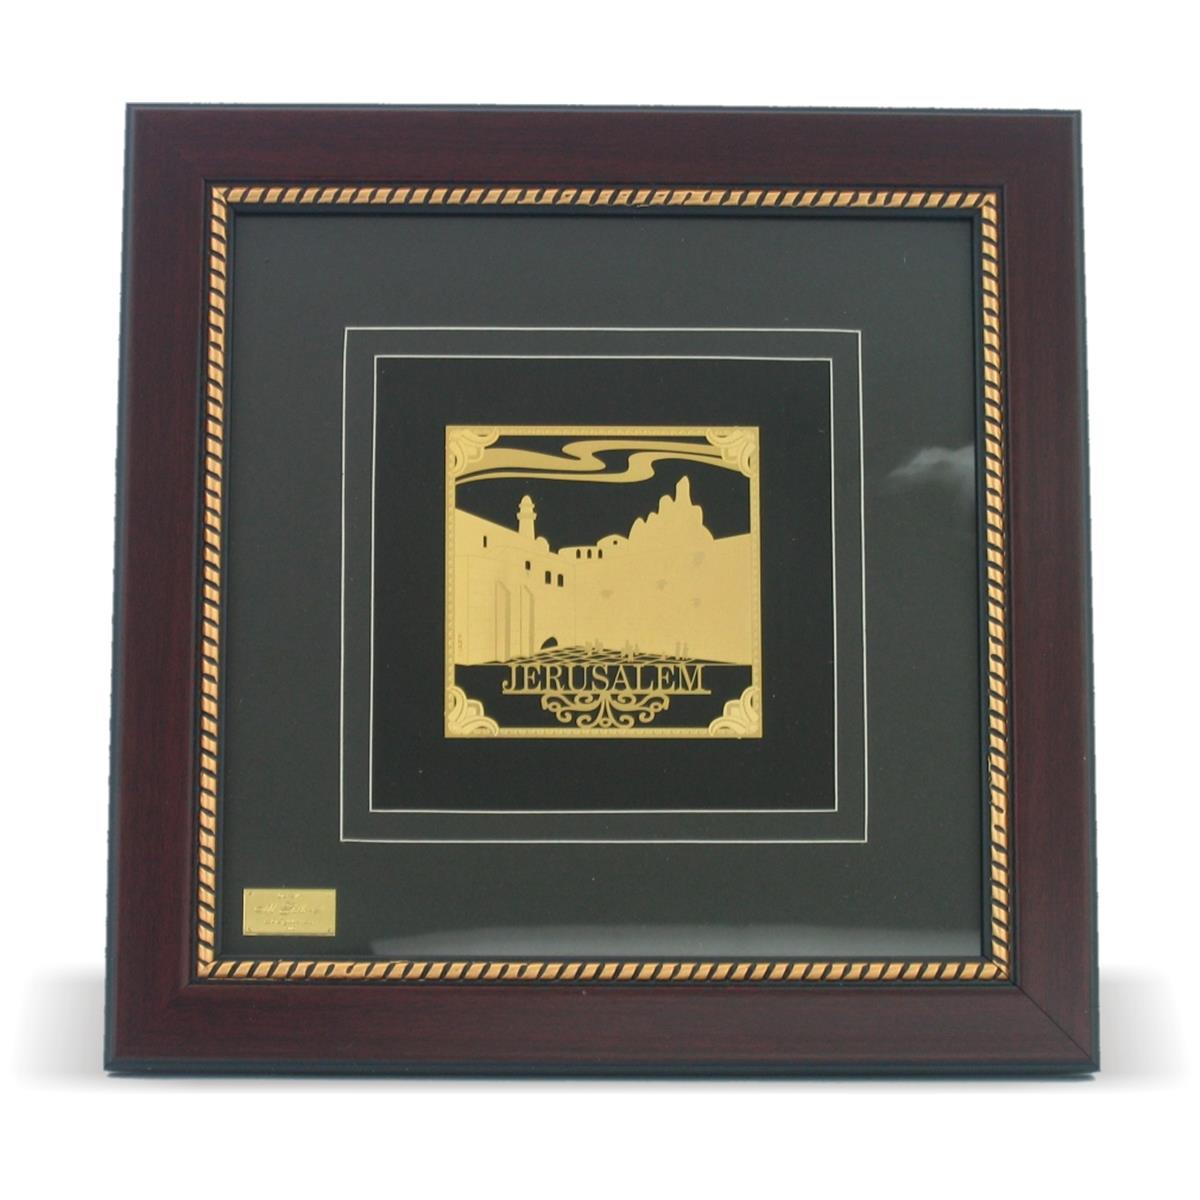 A&m Judaica And Gifts 85528 32 X 32 In. Golden Plate In Glass Frame -the Kotel